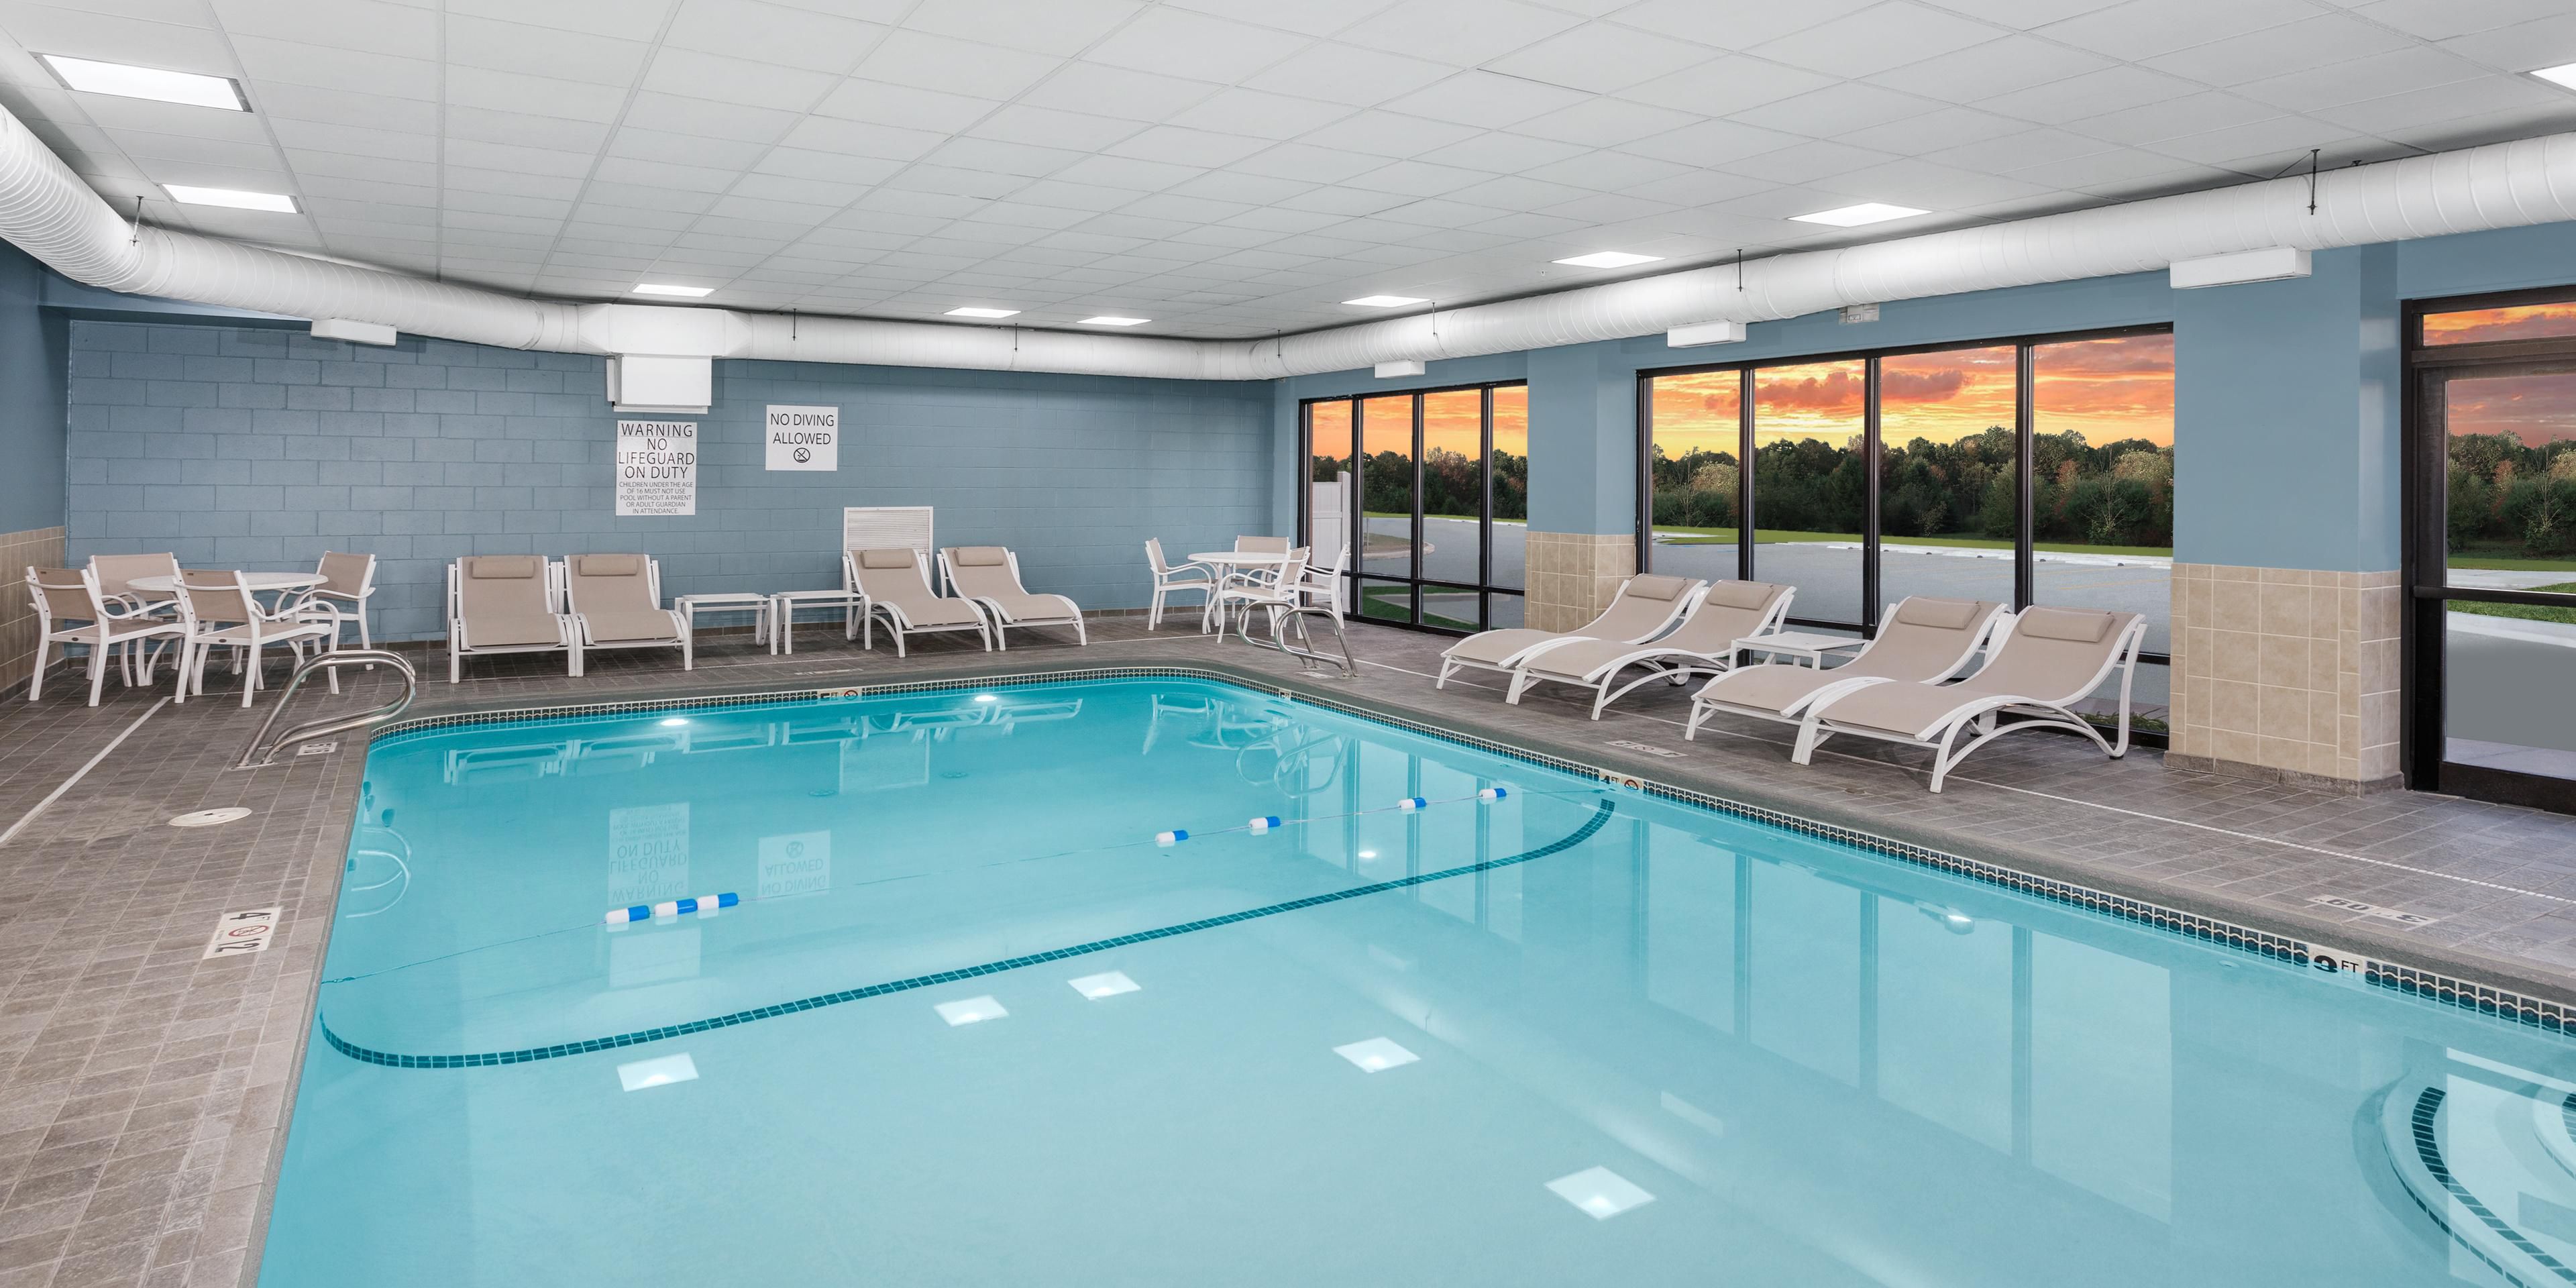 Traveling with kids? Our oversized indoor pool will be just the remedy you are looking for after a long day of travel. Dive right in to adventure in South Portland, Maine!